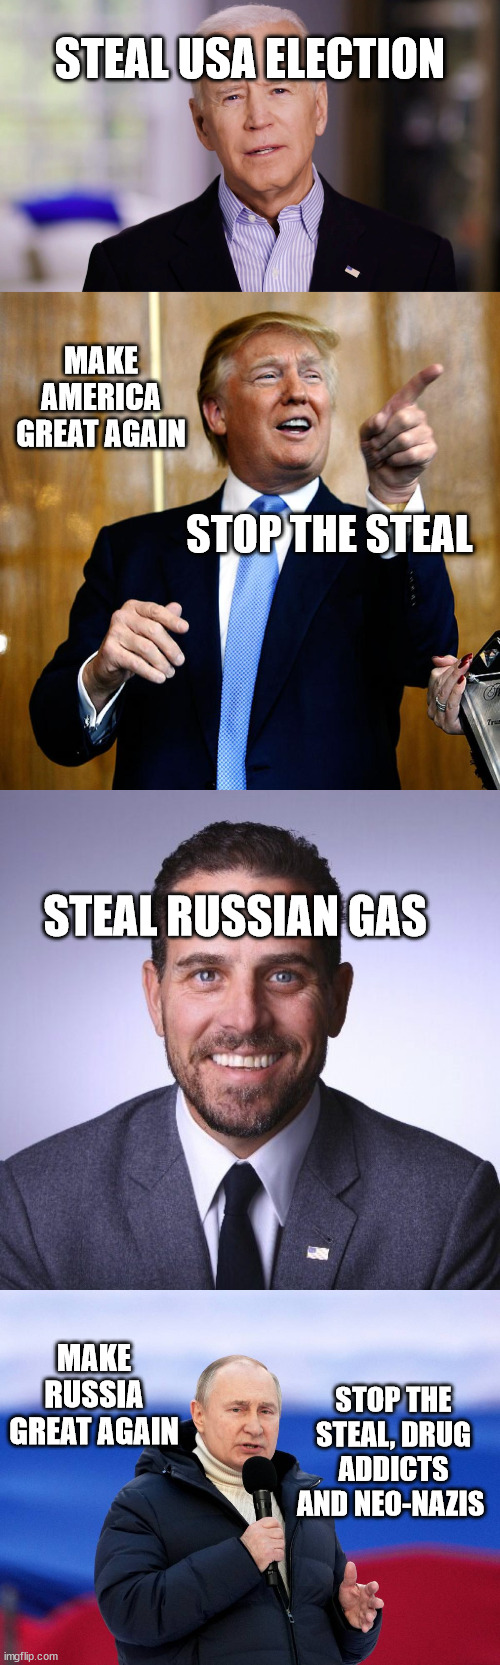 Stop the steal | STEAL USA ELECTION; MAKE AMERICA GREAT AGAIN; STOP THE STEAL; STEAL RUSSIAN GAS; MAKE RUSSIA GREAT AGAIN; STOP THE STEAL, DRUG ADDICTS AND NEO-NAZIS | image tagged in hunter biden,vladimir putin,joe biden,donald trump,memes,politics | made w/ Imgflip meme maker